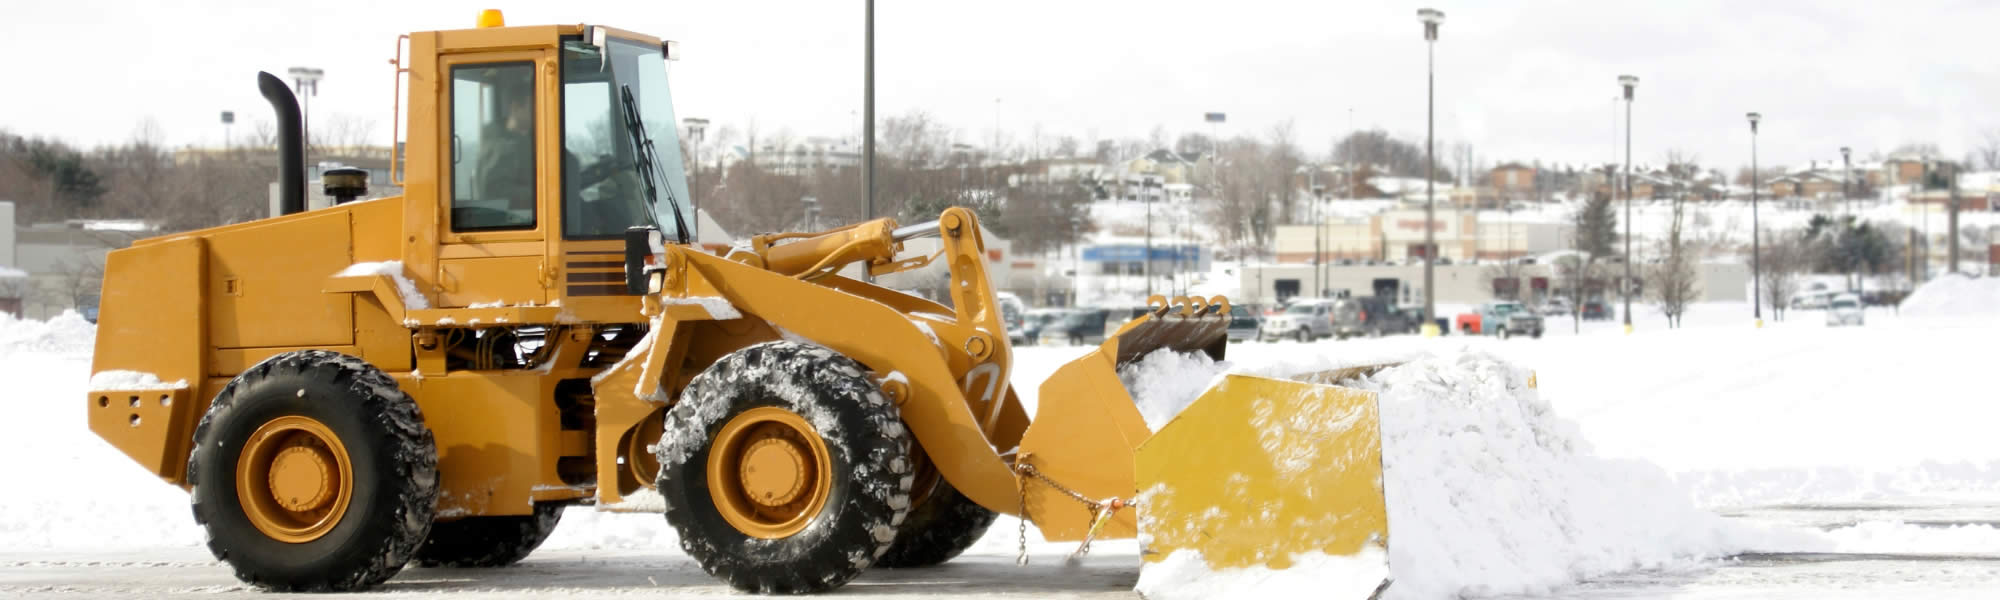 Wrightstown Snow and Ice Removal Services near me